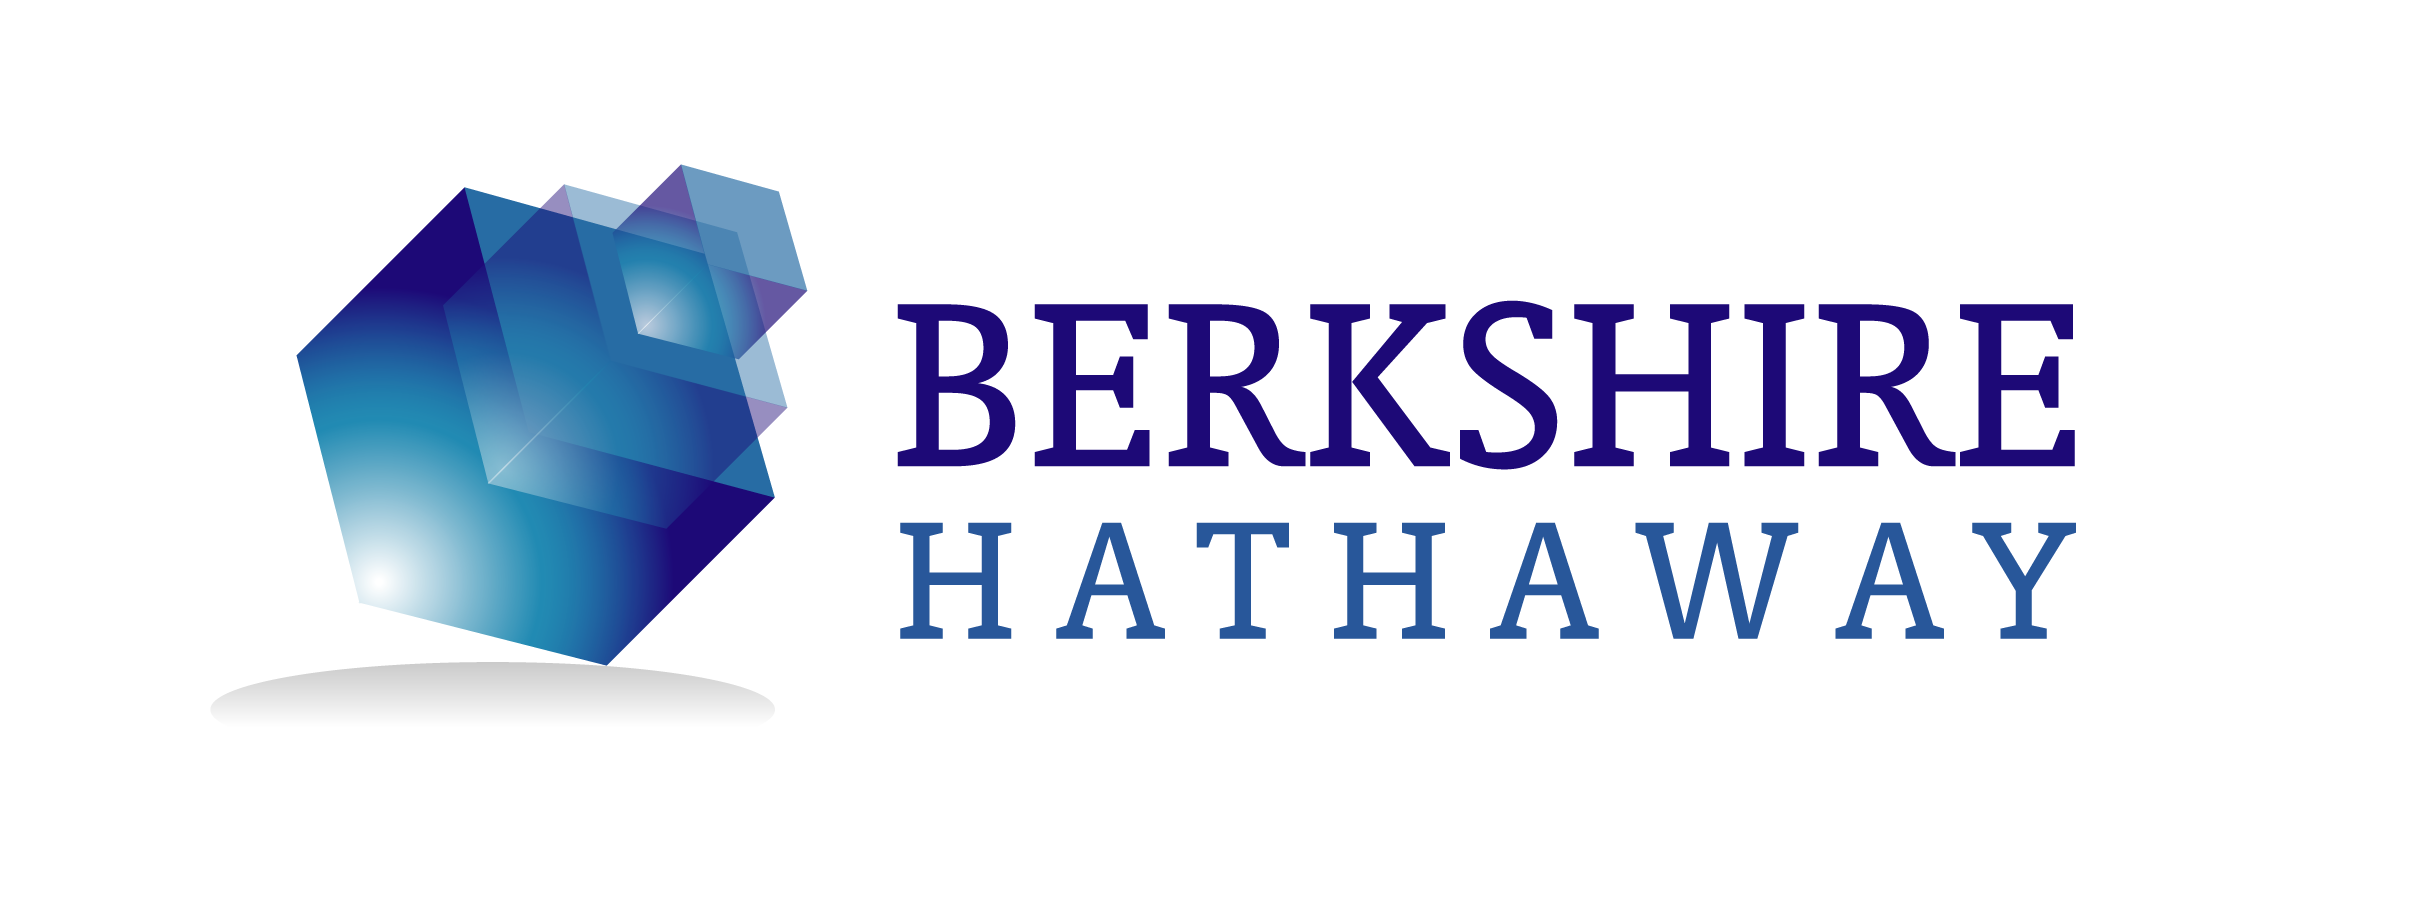 Berkshire Hathaway Inc. (BRK.A) - Biggest Companies in the World